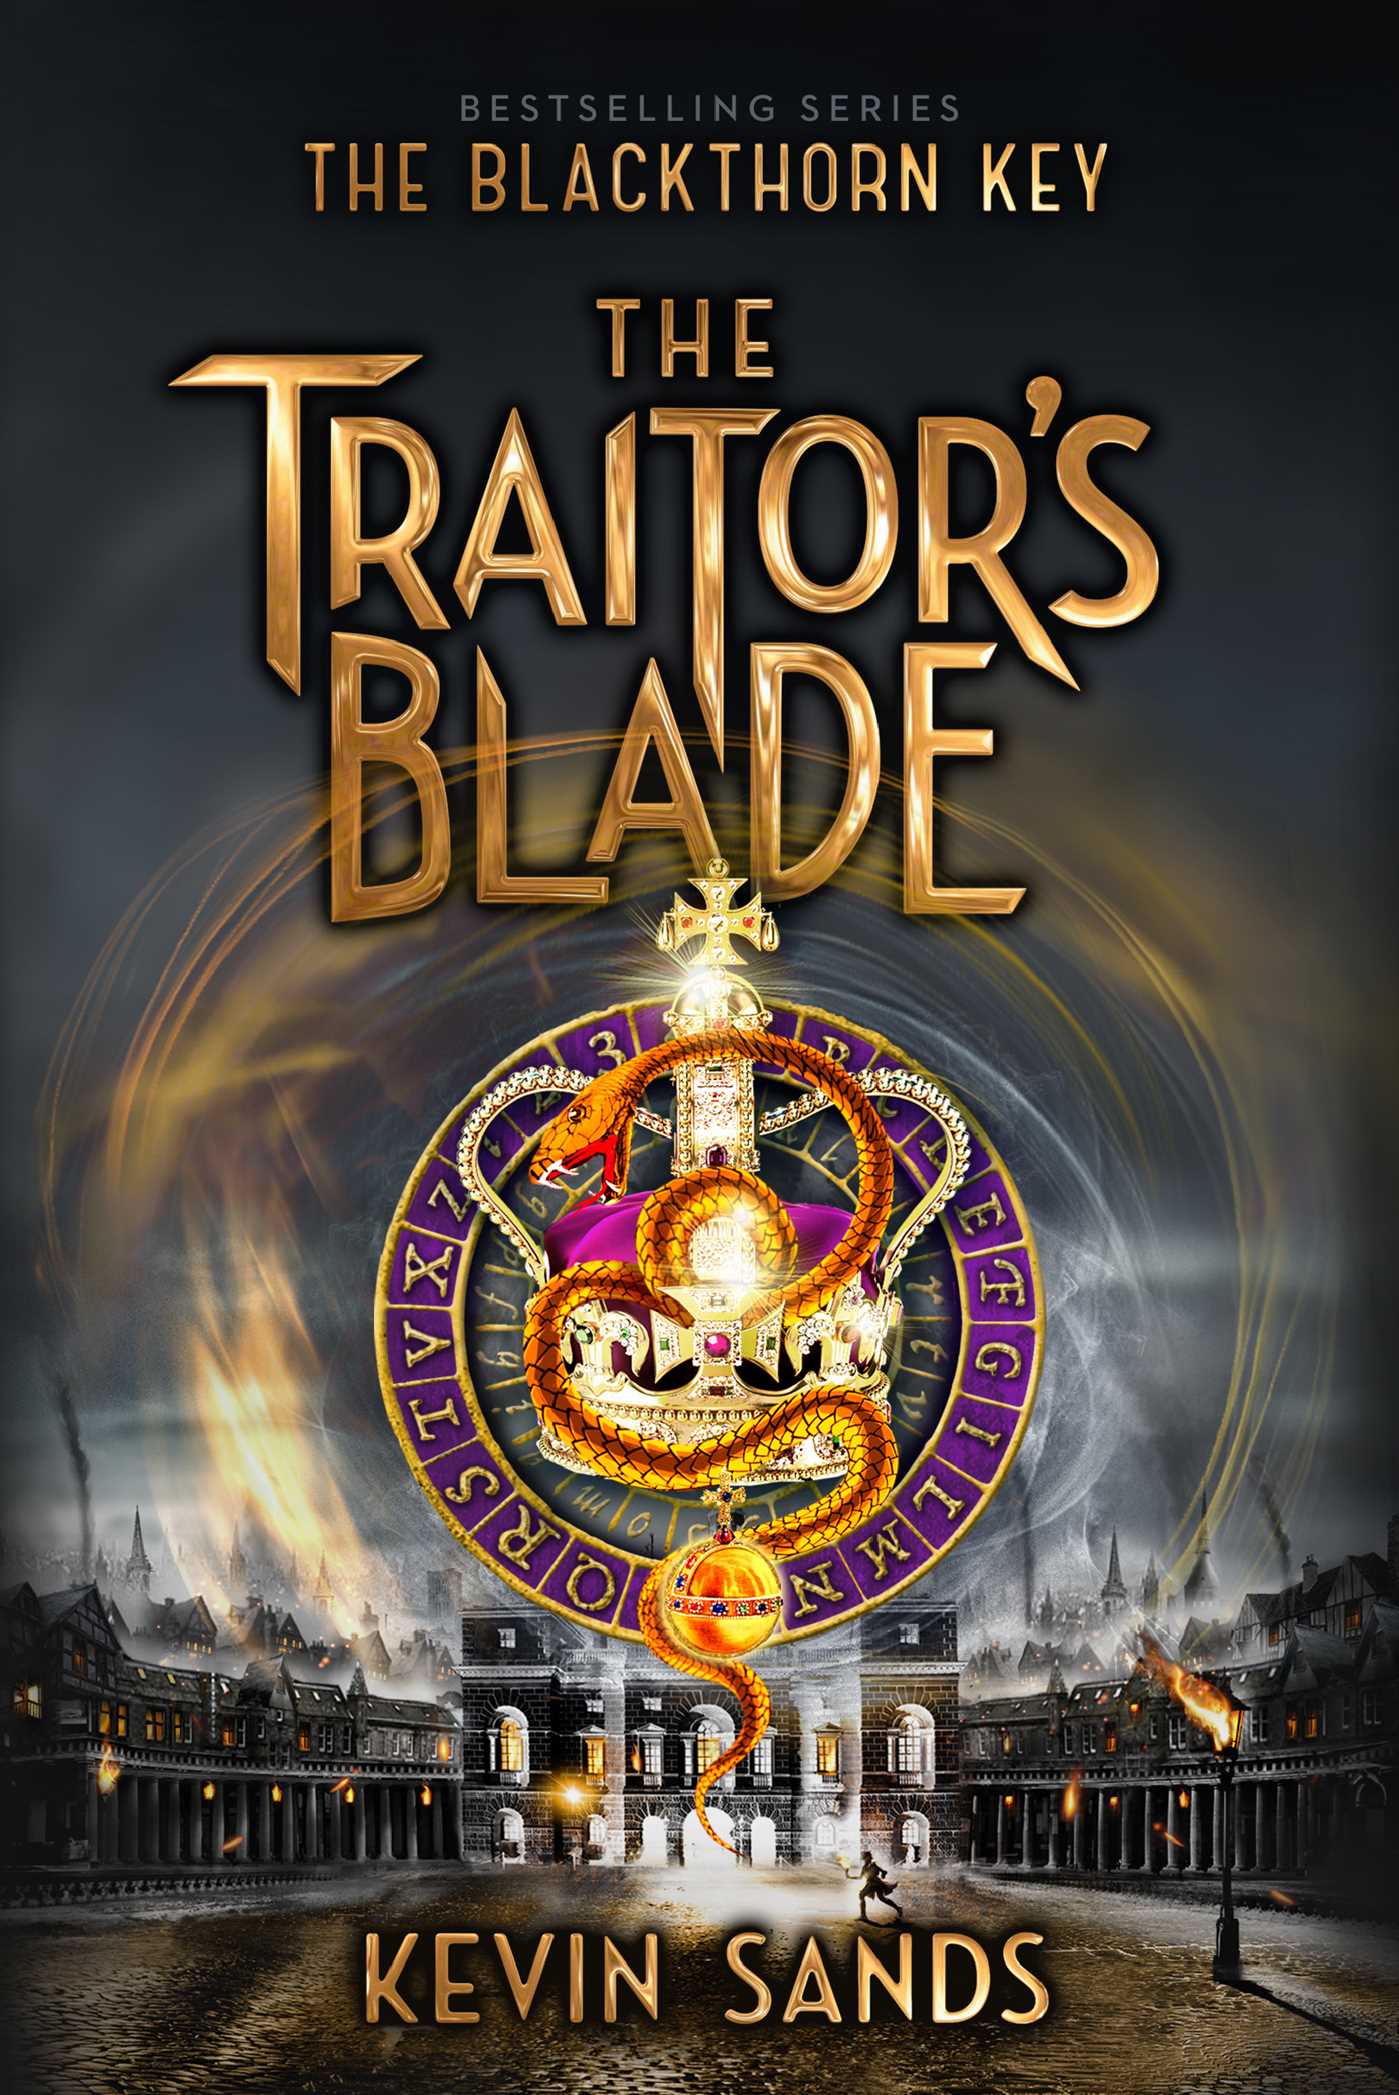 The Traitor's Blade